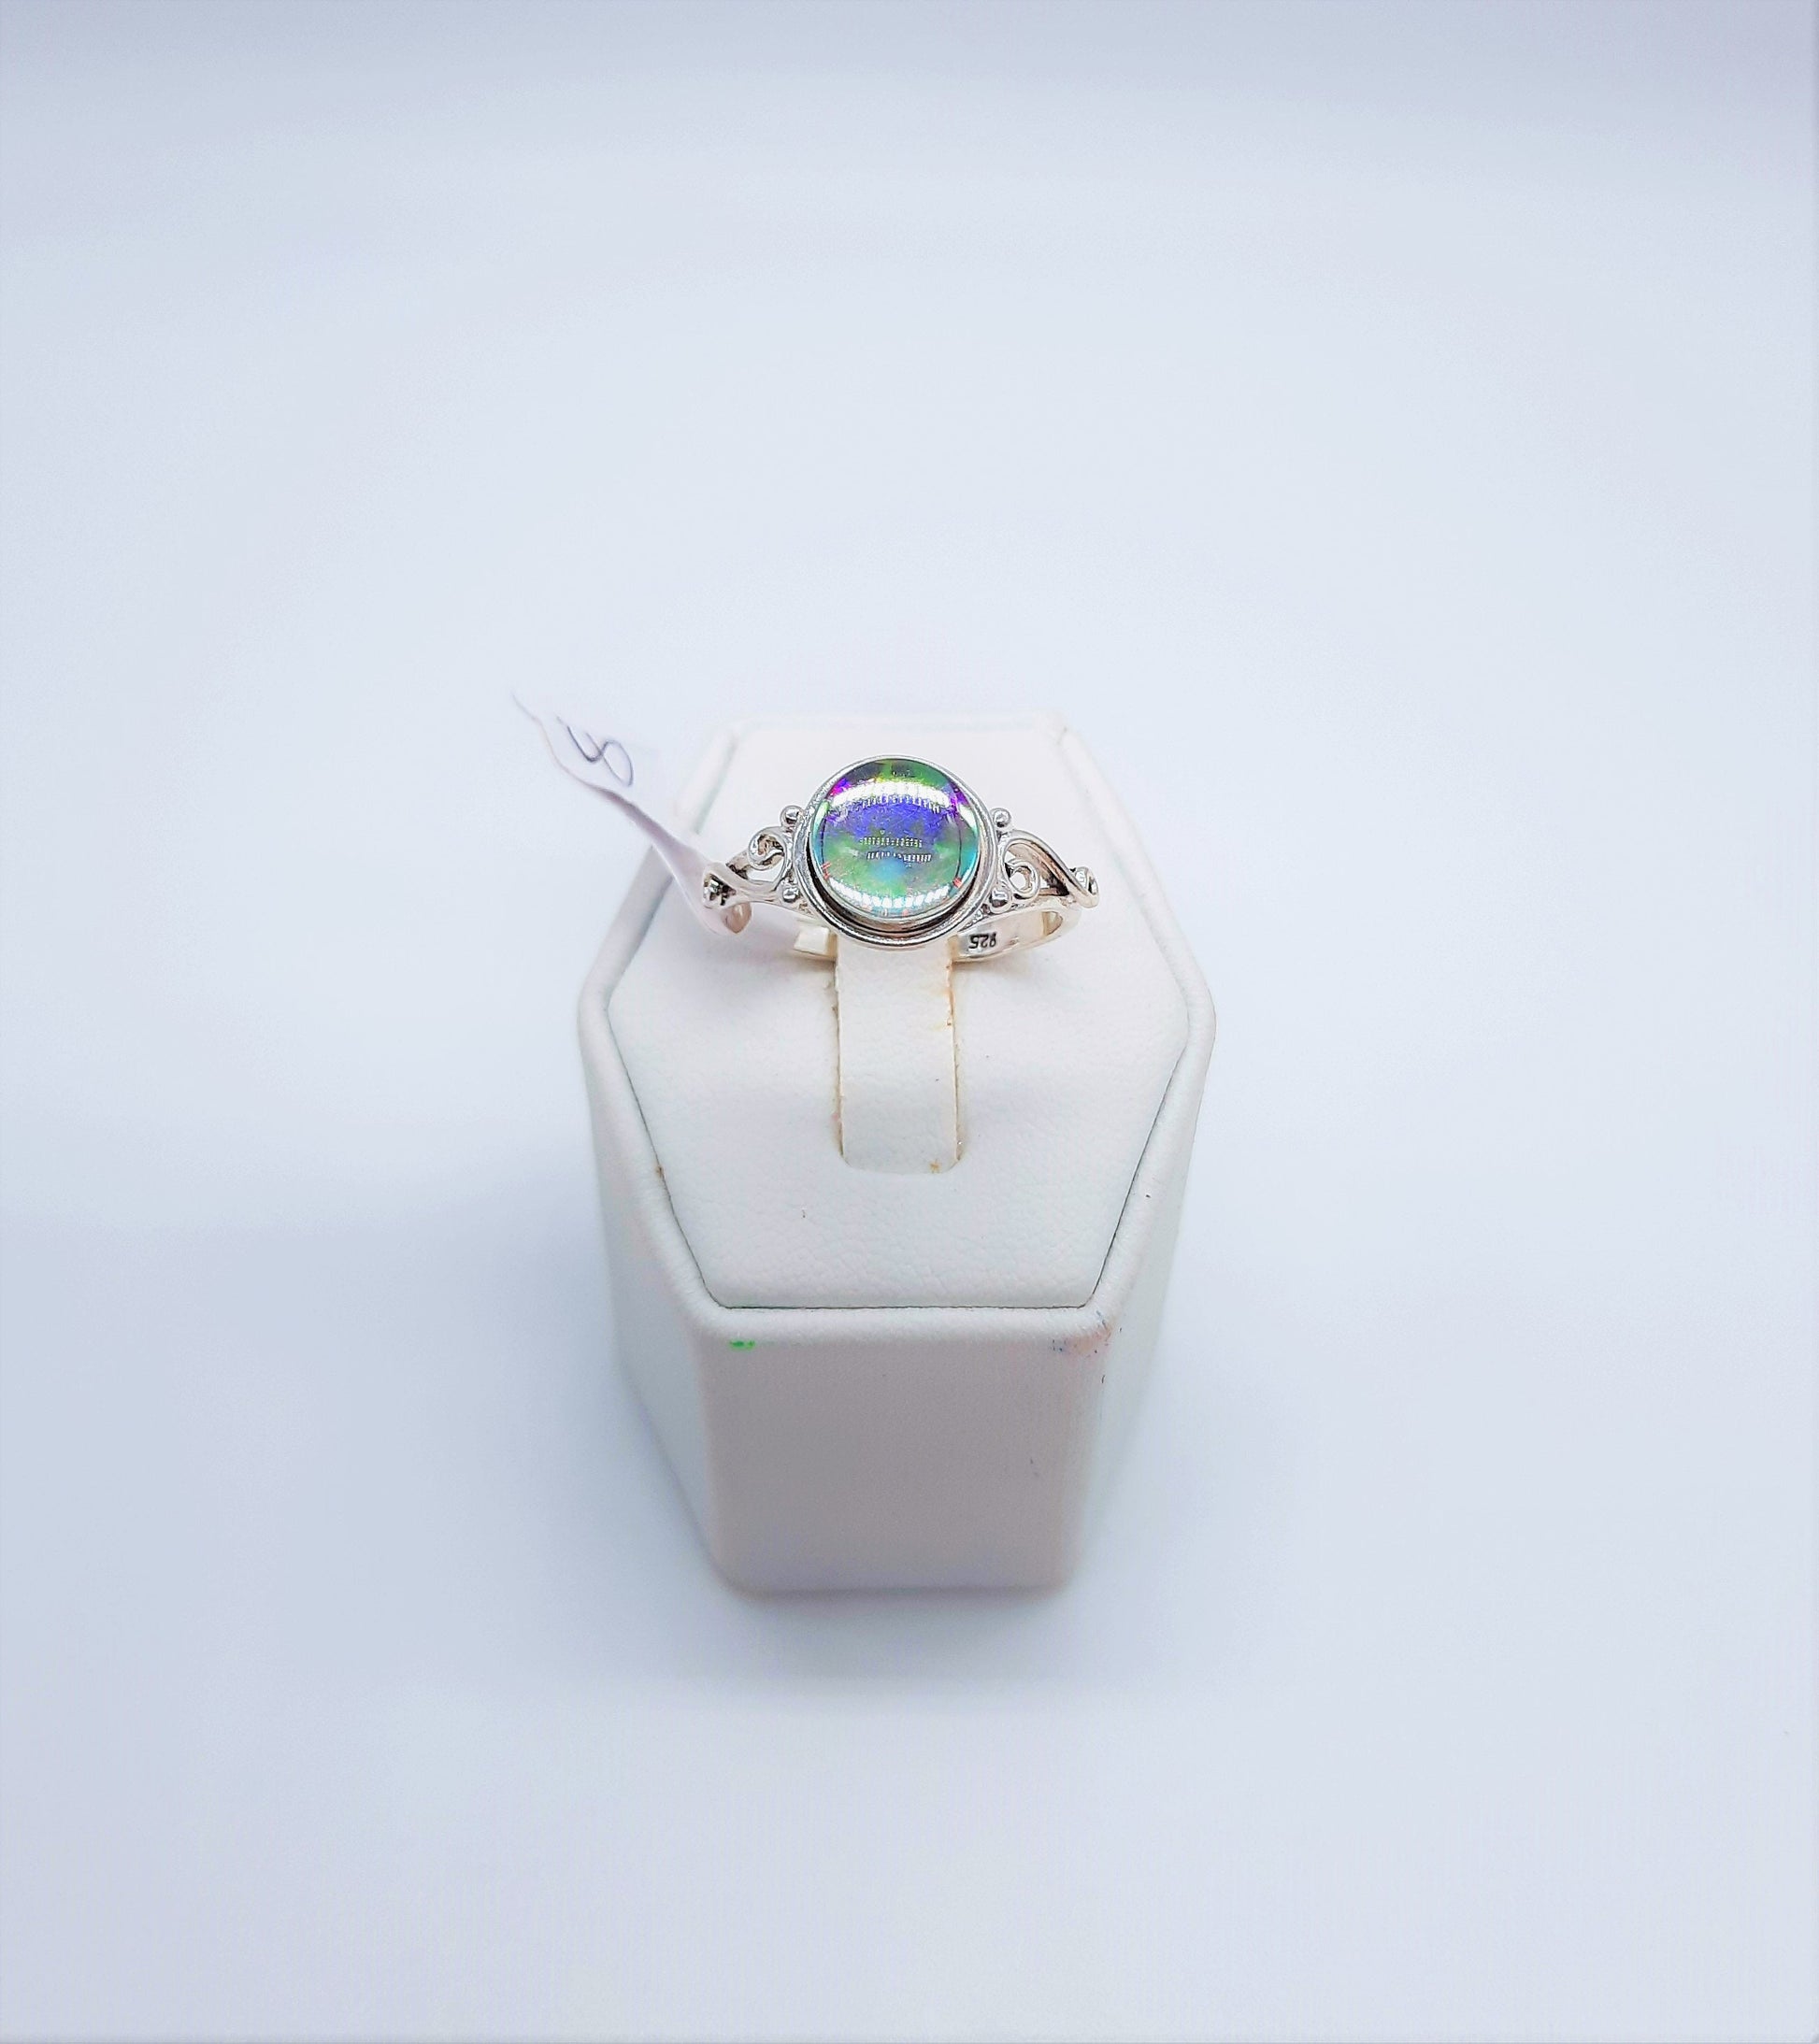 Handcrafted 925 Sterling Silver Reflective Iridescent Rainbow/ Pink / Blue / Green Mirror Ball Ring, Domed w/ Holographic Infused Resin